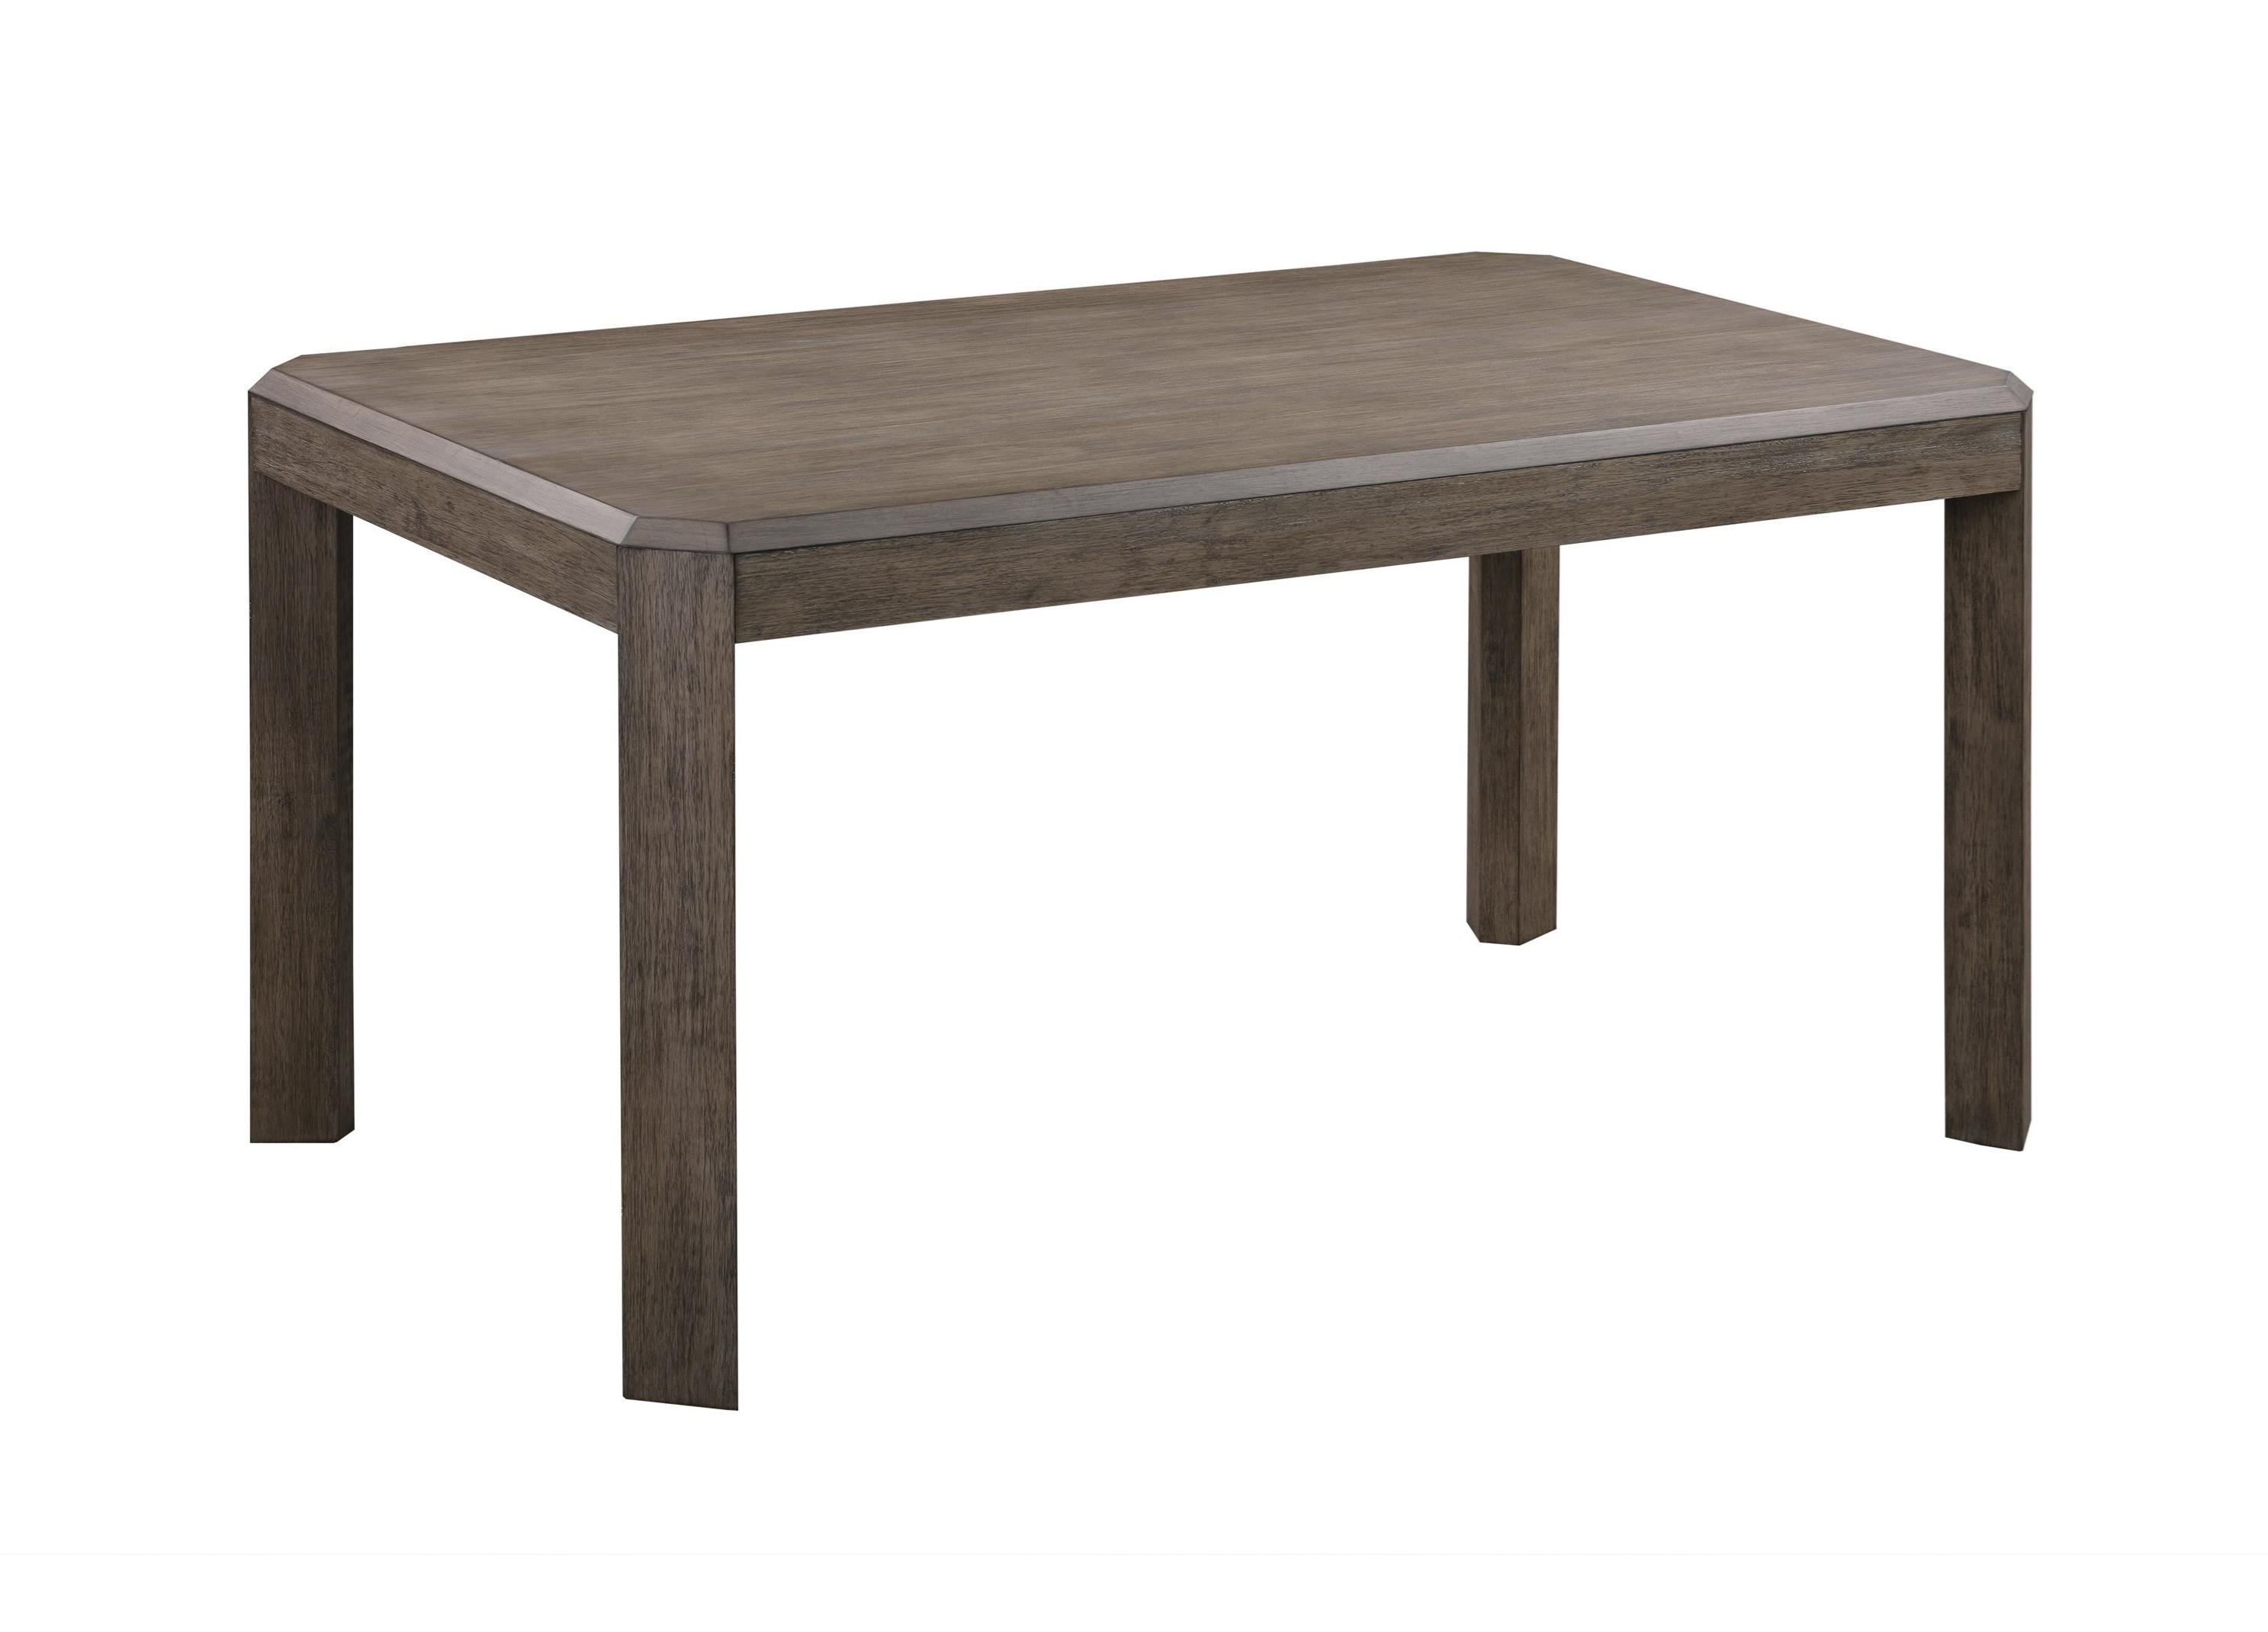 Transitional Dining Table ACADIA GHCL60 in Toffee 